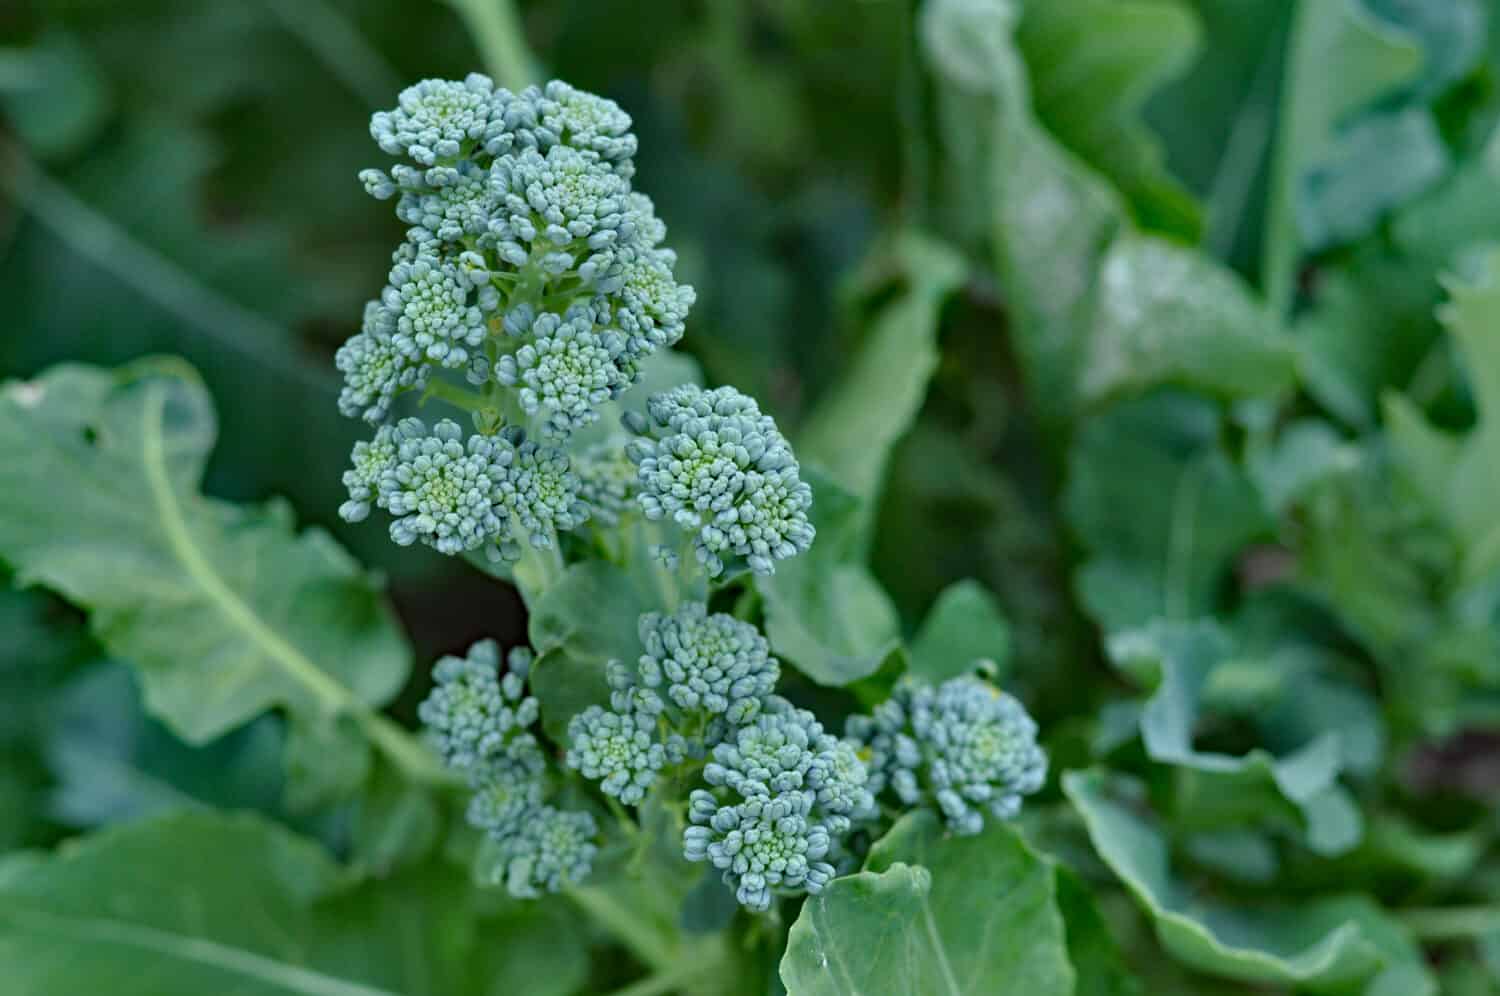 Broccolini stem growing in a vegetable patch